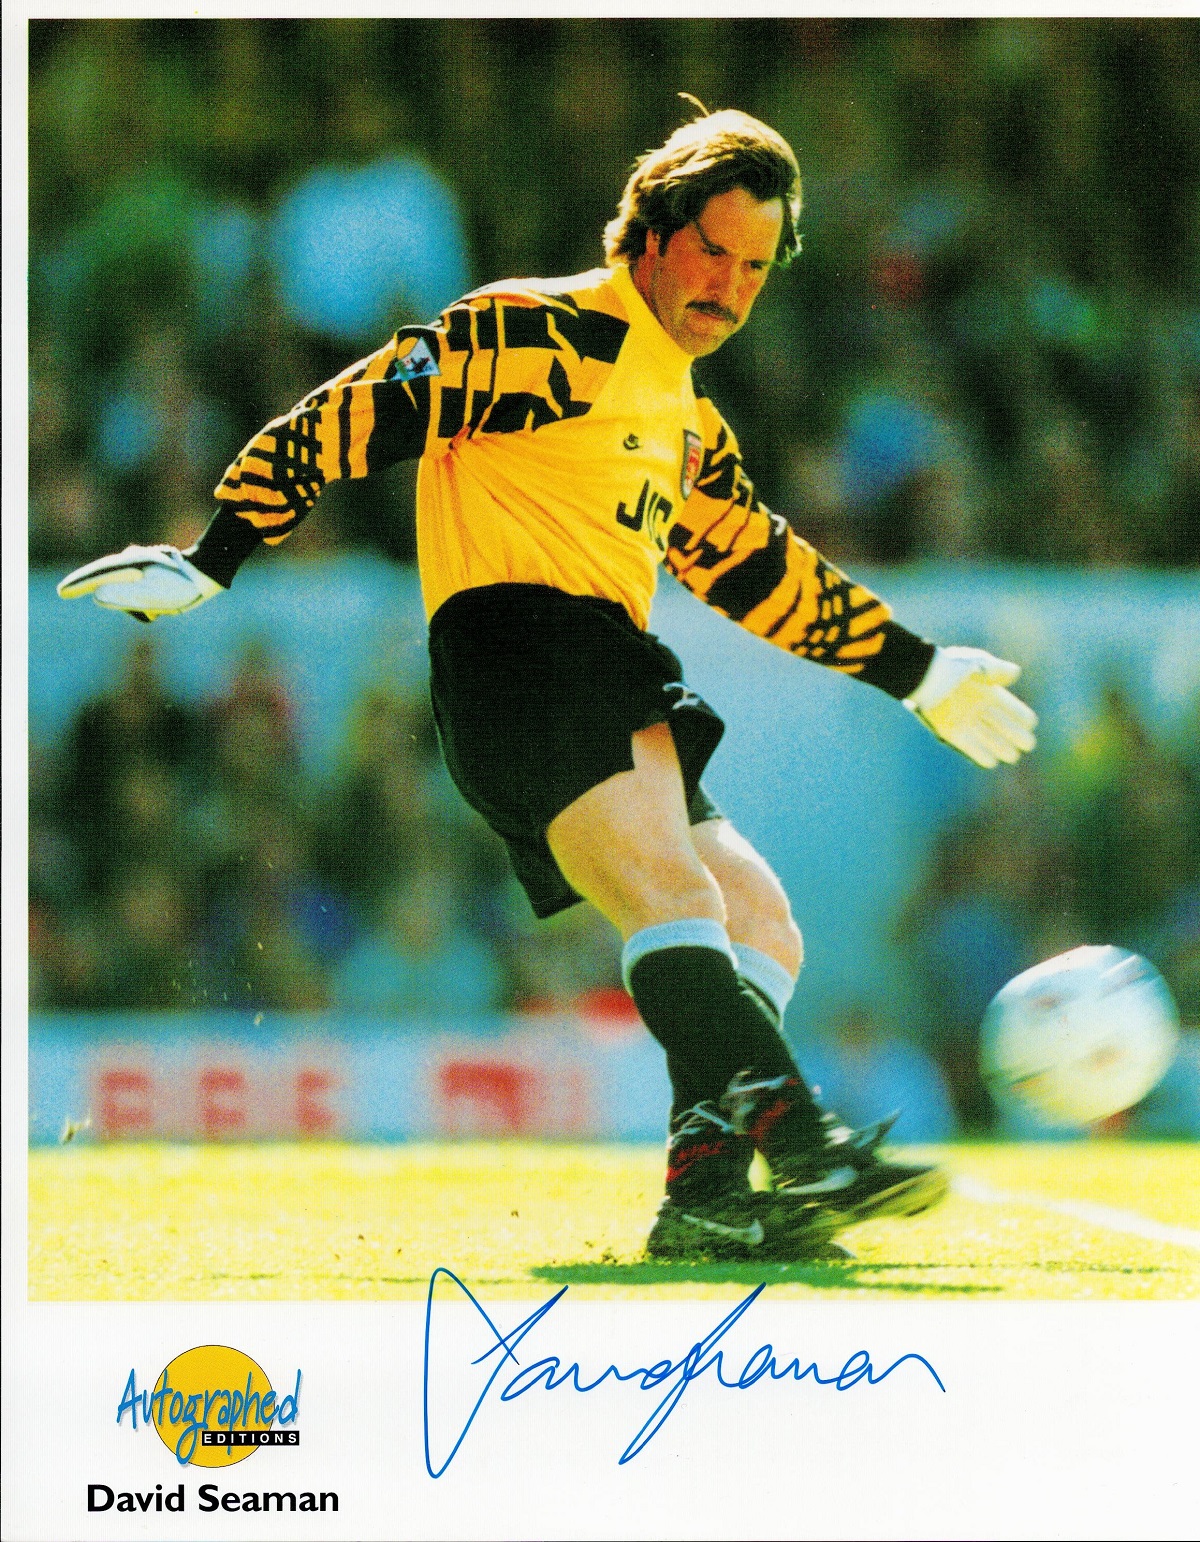 Football David Seaman Hand signed Autographed Editions 10x8 Colour Photo of Seaman in action for